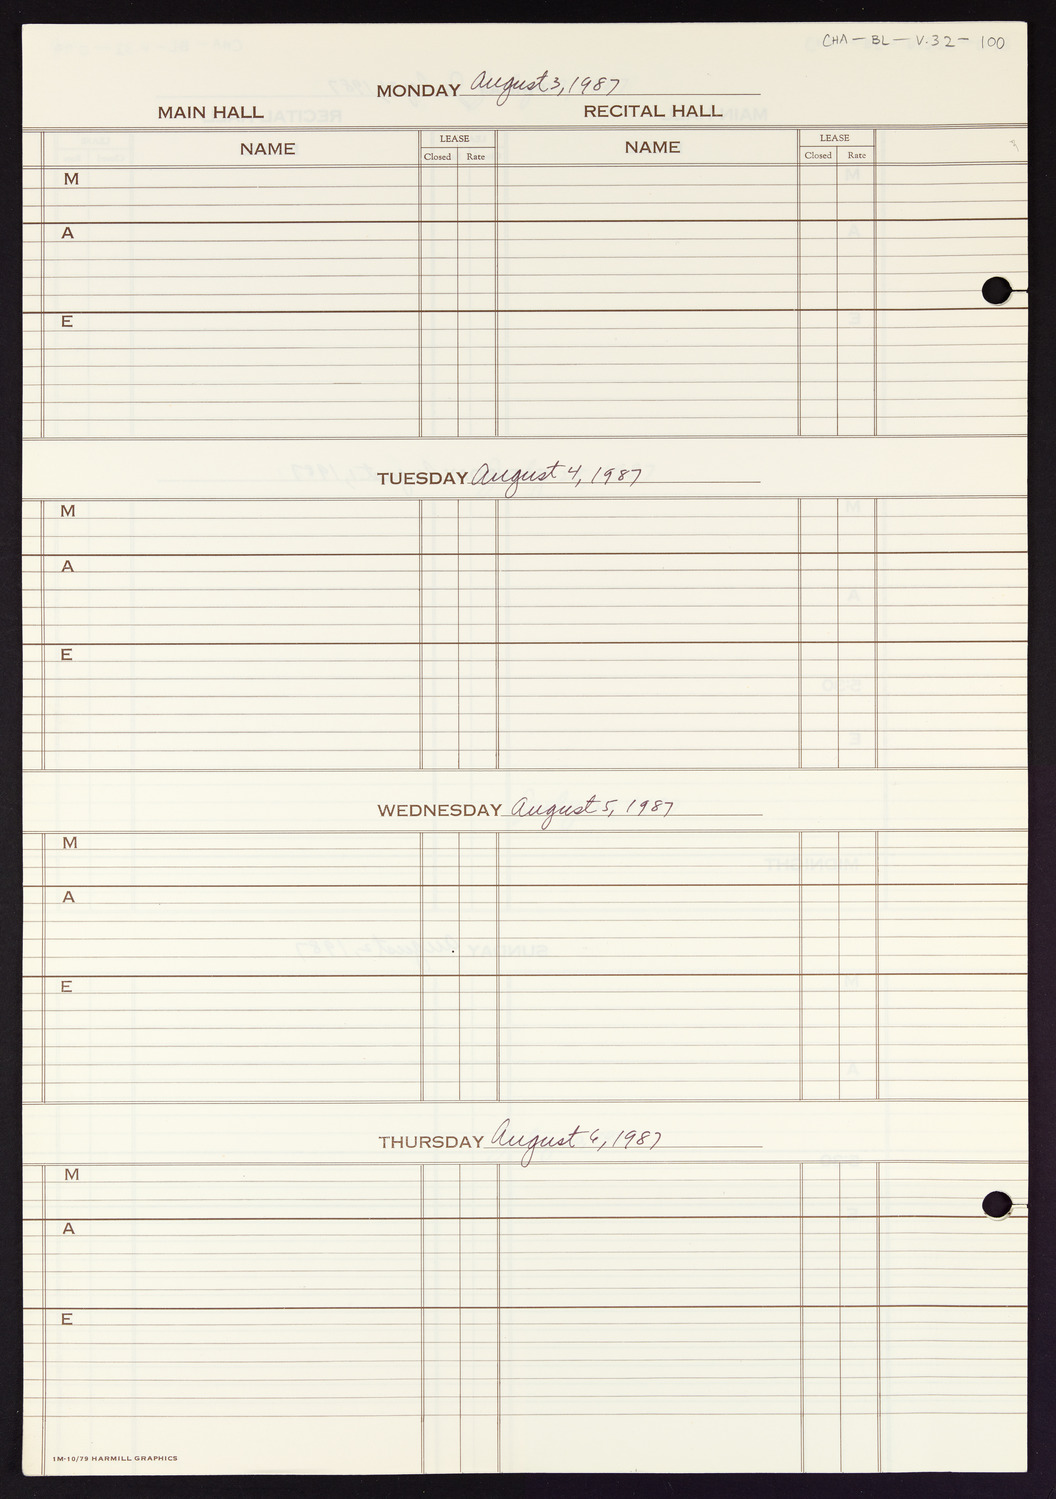 Carnegie Hall Booking Ledger, volume 32, page 100